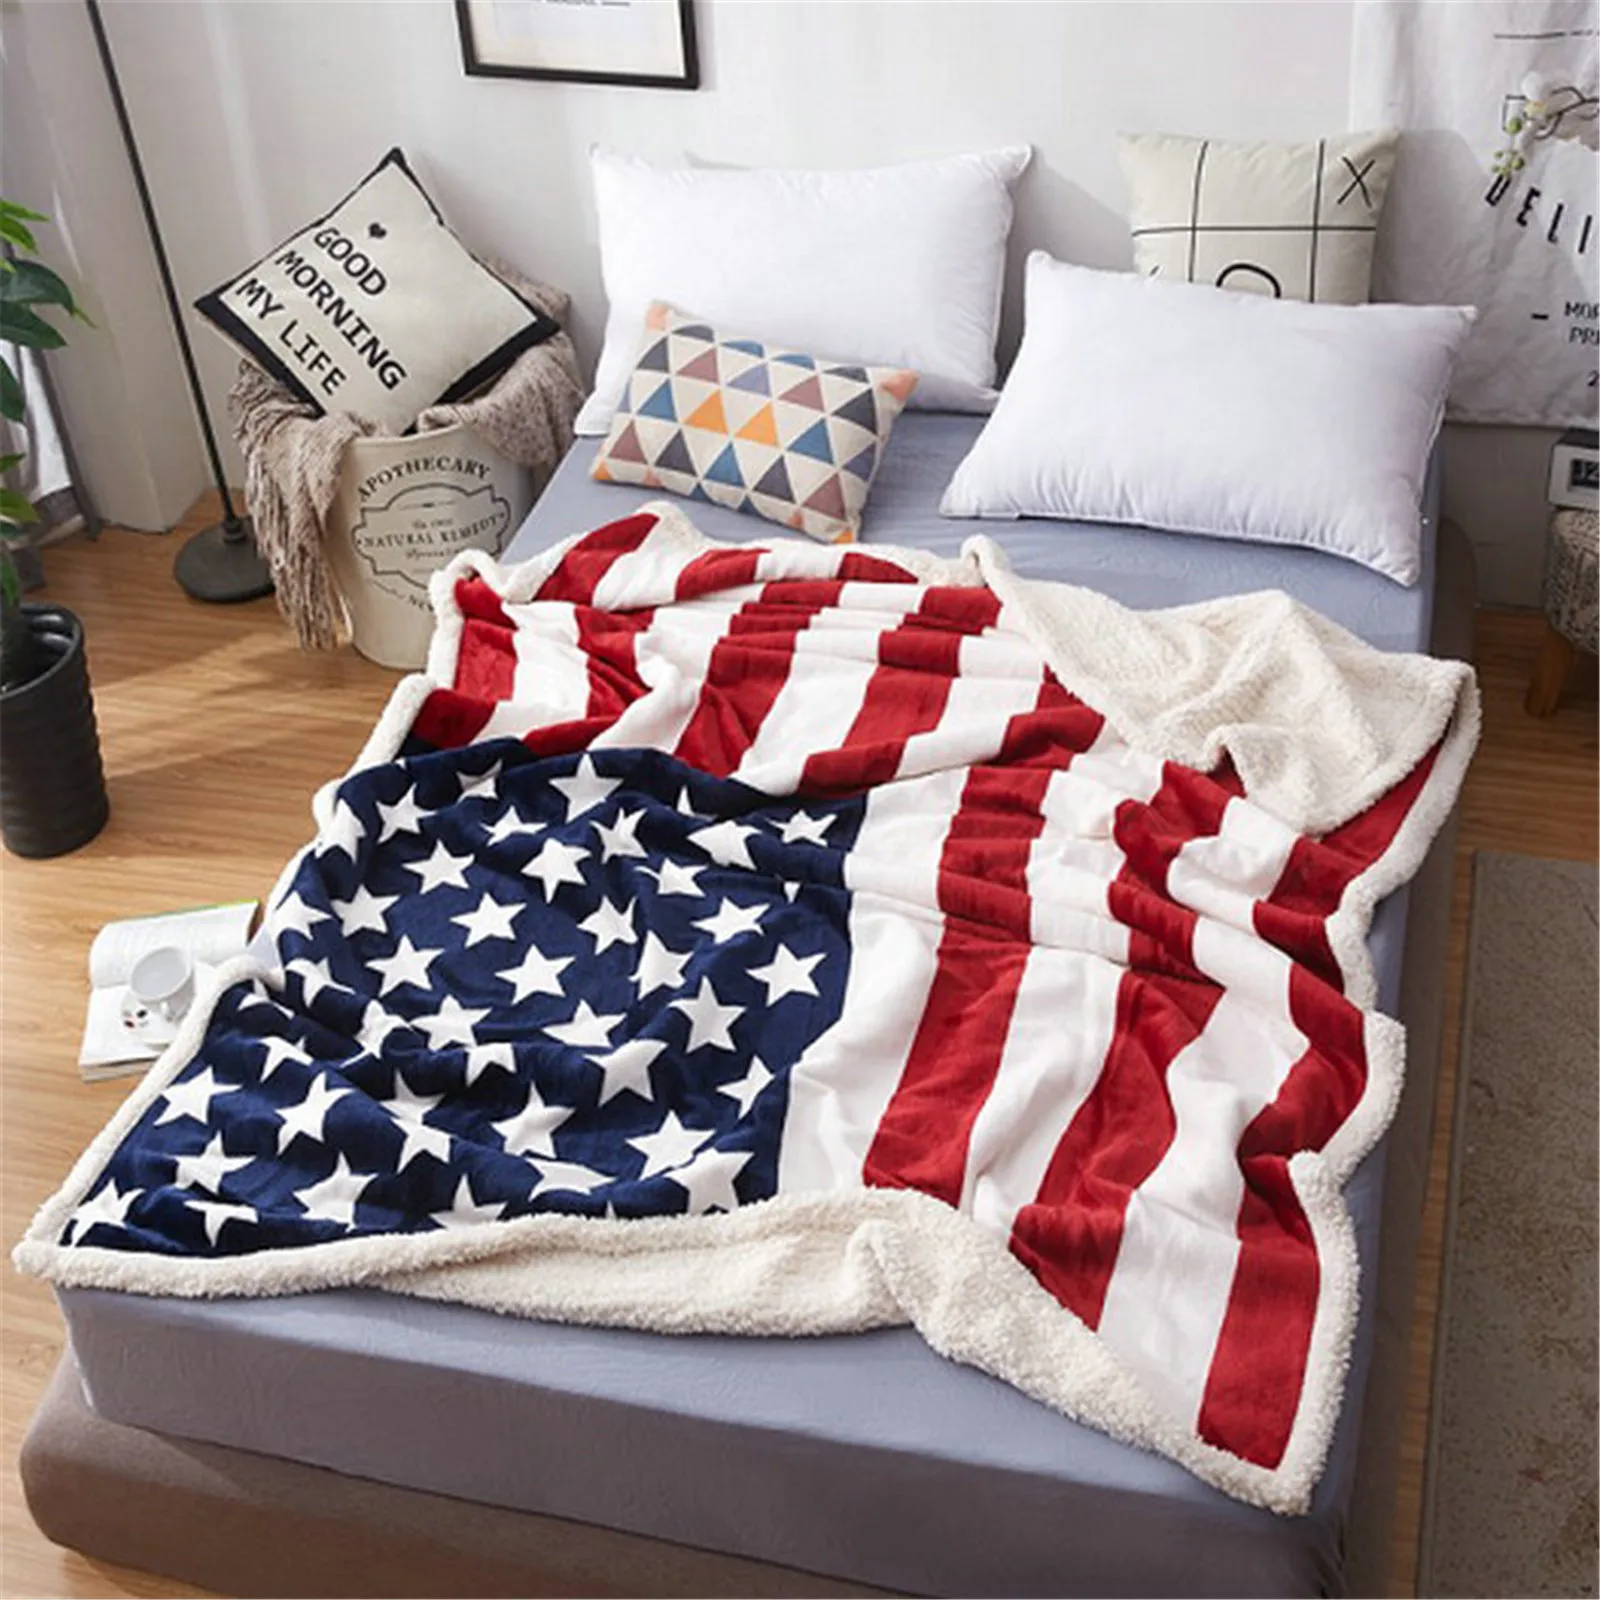 

CLOOCL US UK Flag Sherpa Blanket Double Layer 3D Printed Fleece Plush Throw Blankets for Sofa Air Condition Quilts Dropshipping